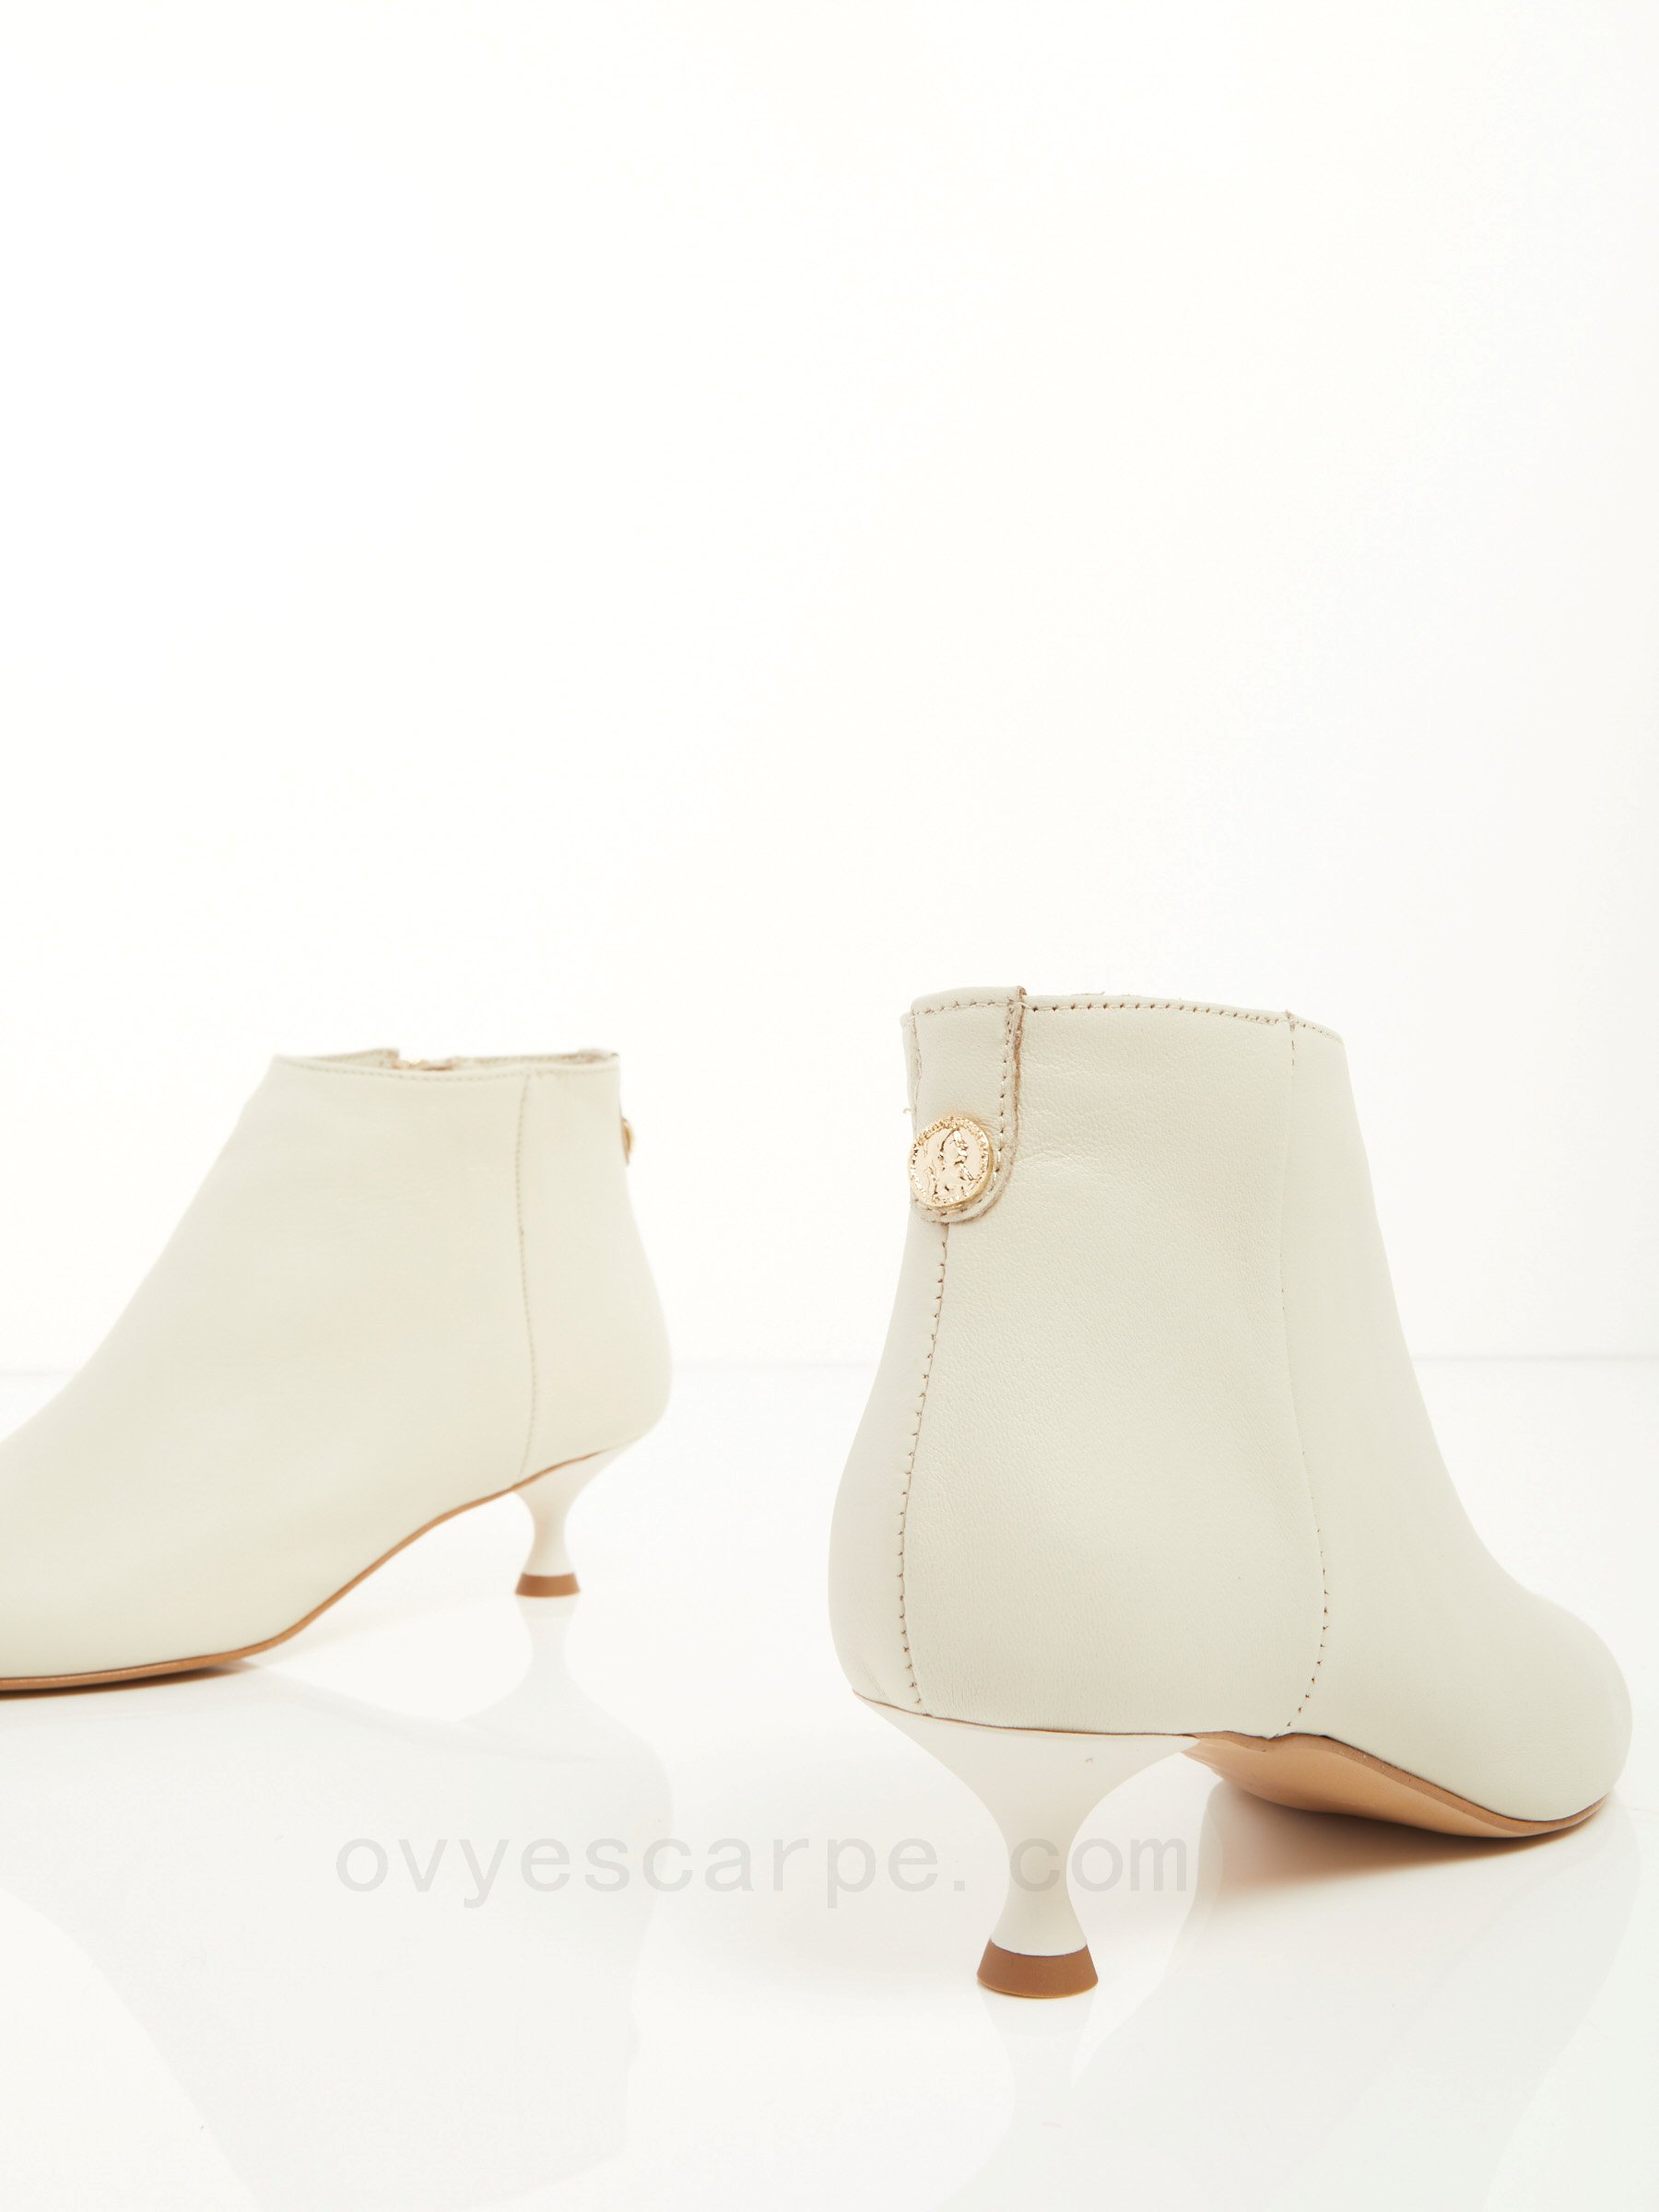 Outlet Online Leather Ankle Boots F08161027-0412